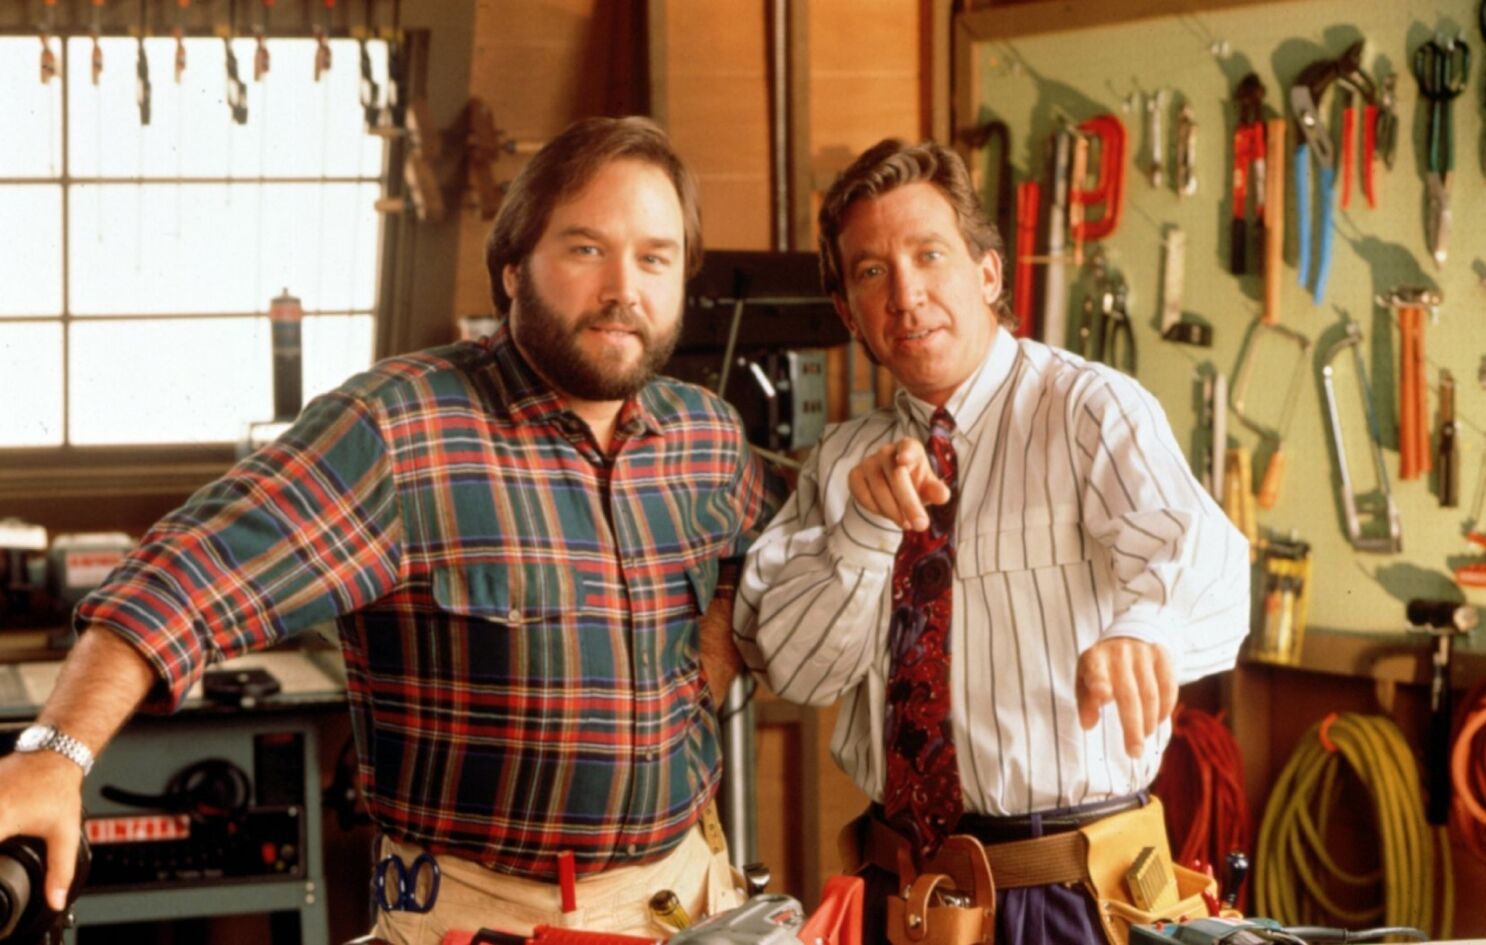 Do You Remember These TV Shows That Aired in the ’90s? Home Improvement